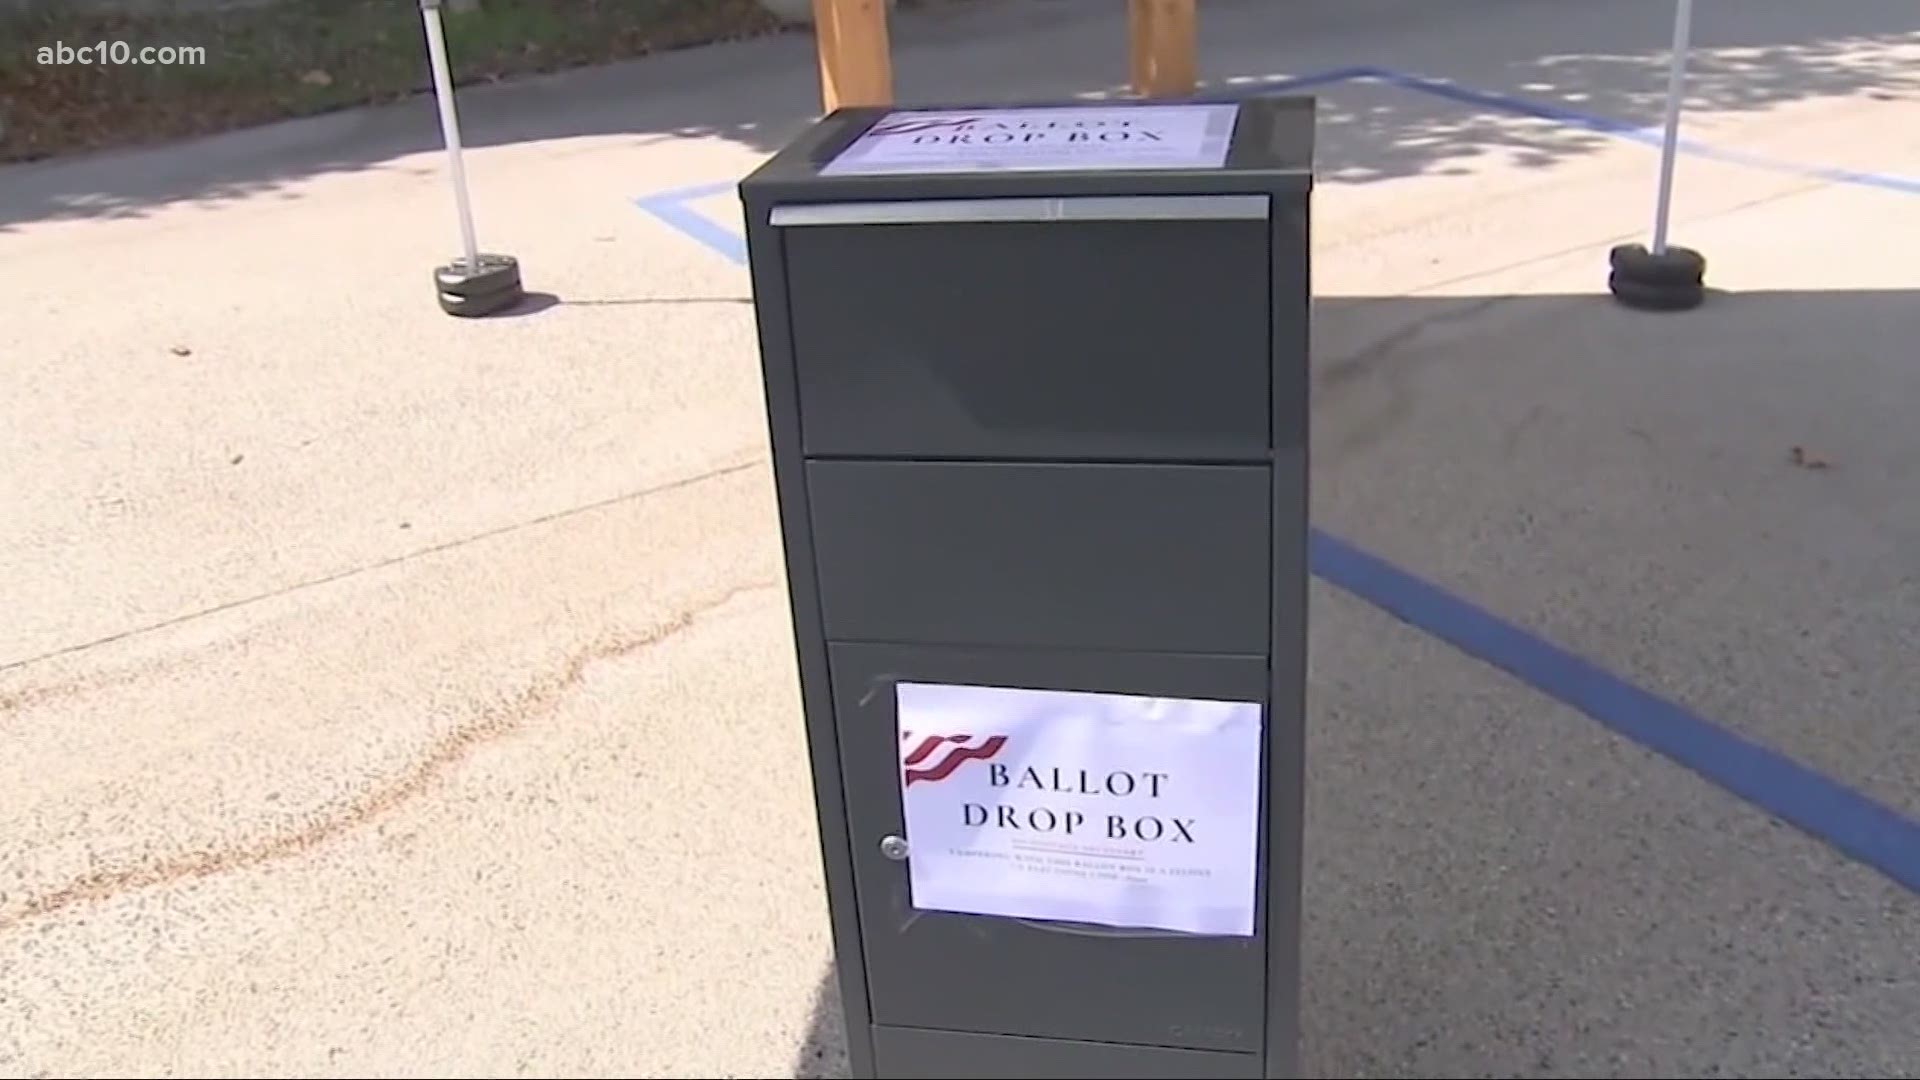 Churches in Modesto and Turlock put out the unofficial ballot boxes, less than a month before Election Day.